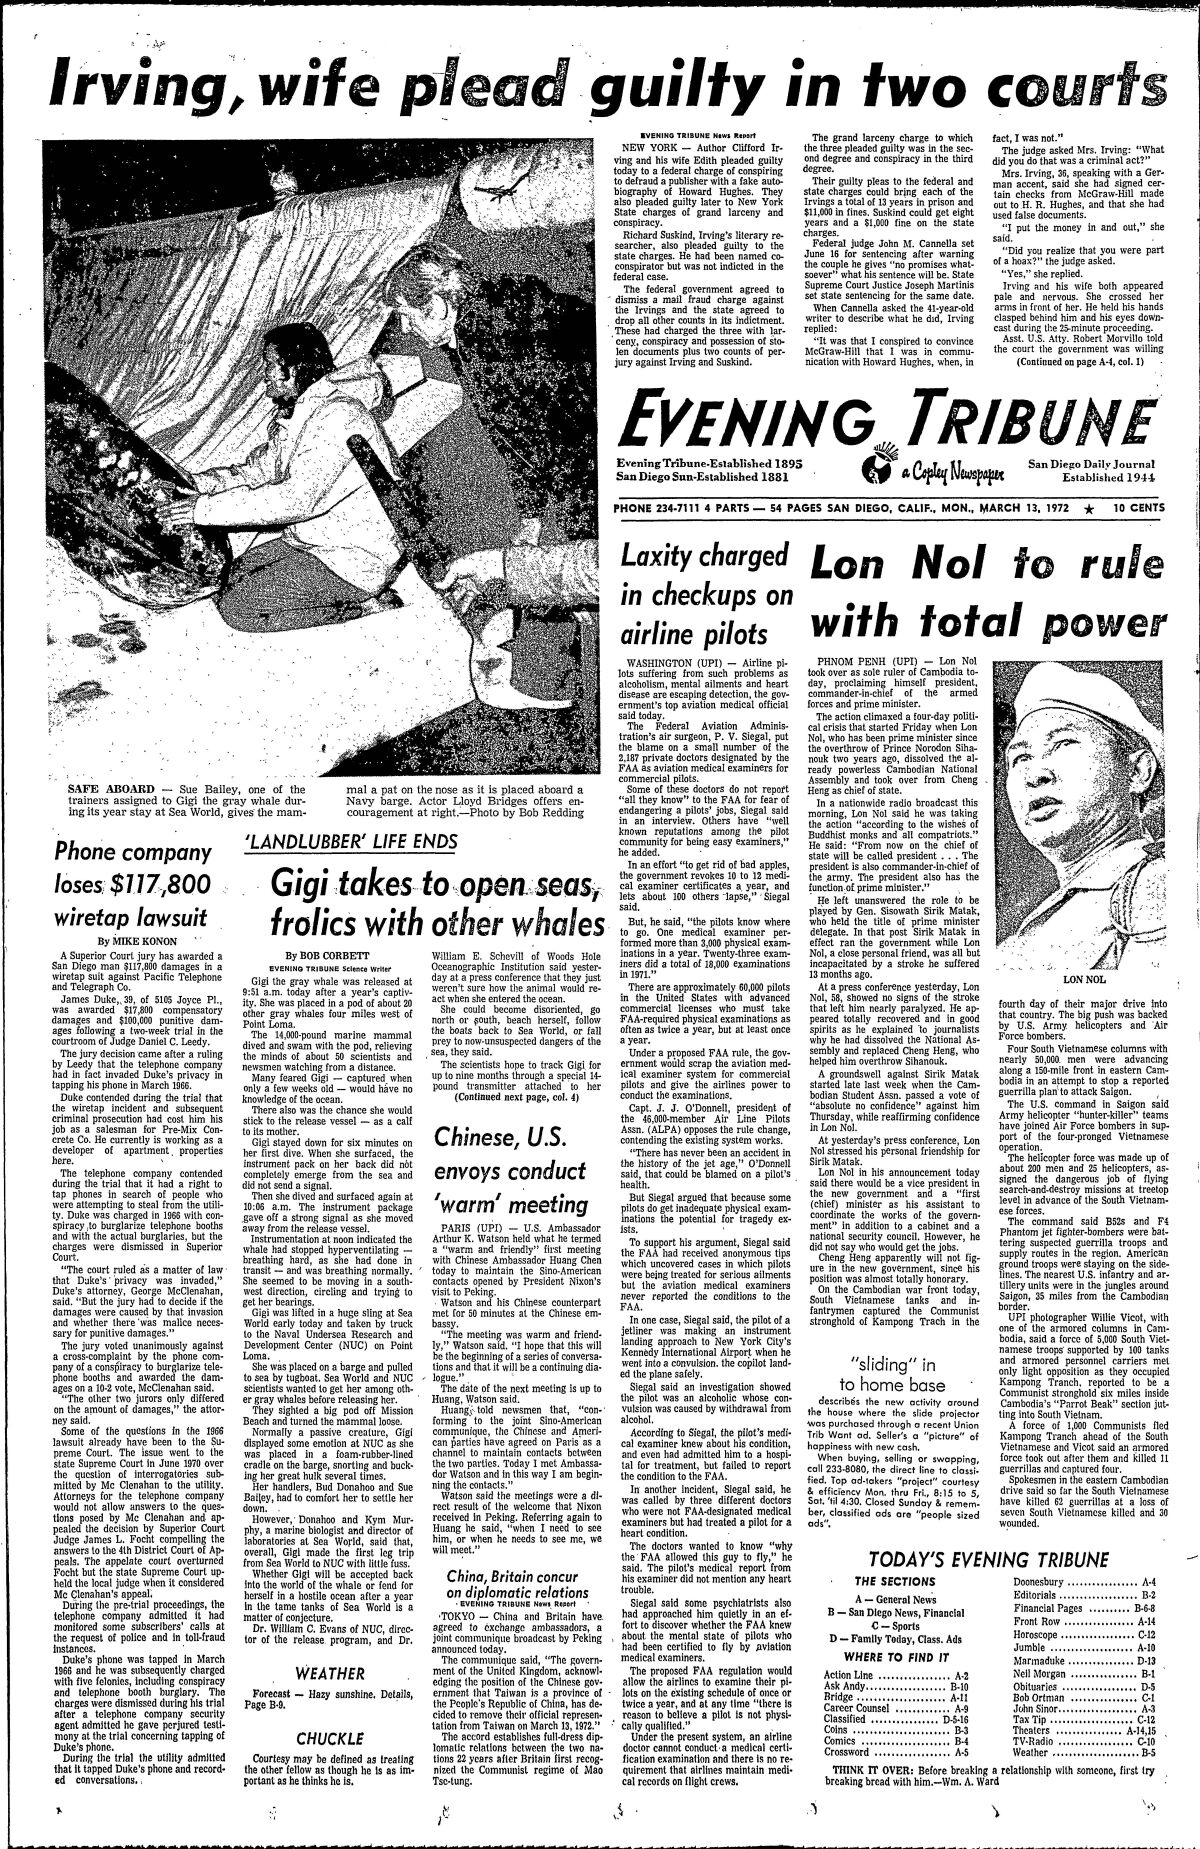 Evening Tribune newspaper March 13, 1972 front page with a story and photo of the whale called Gigi